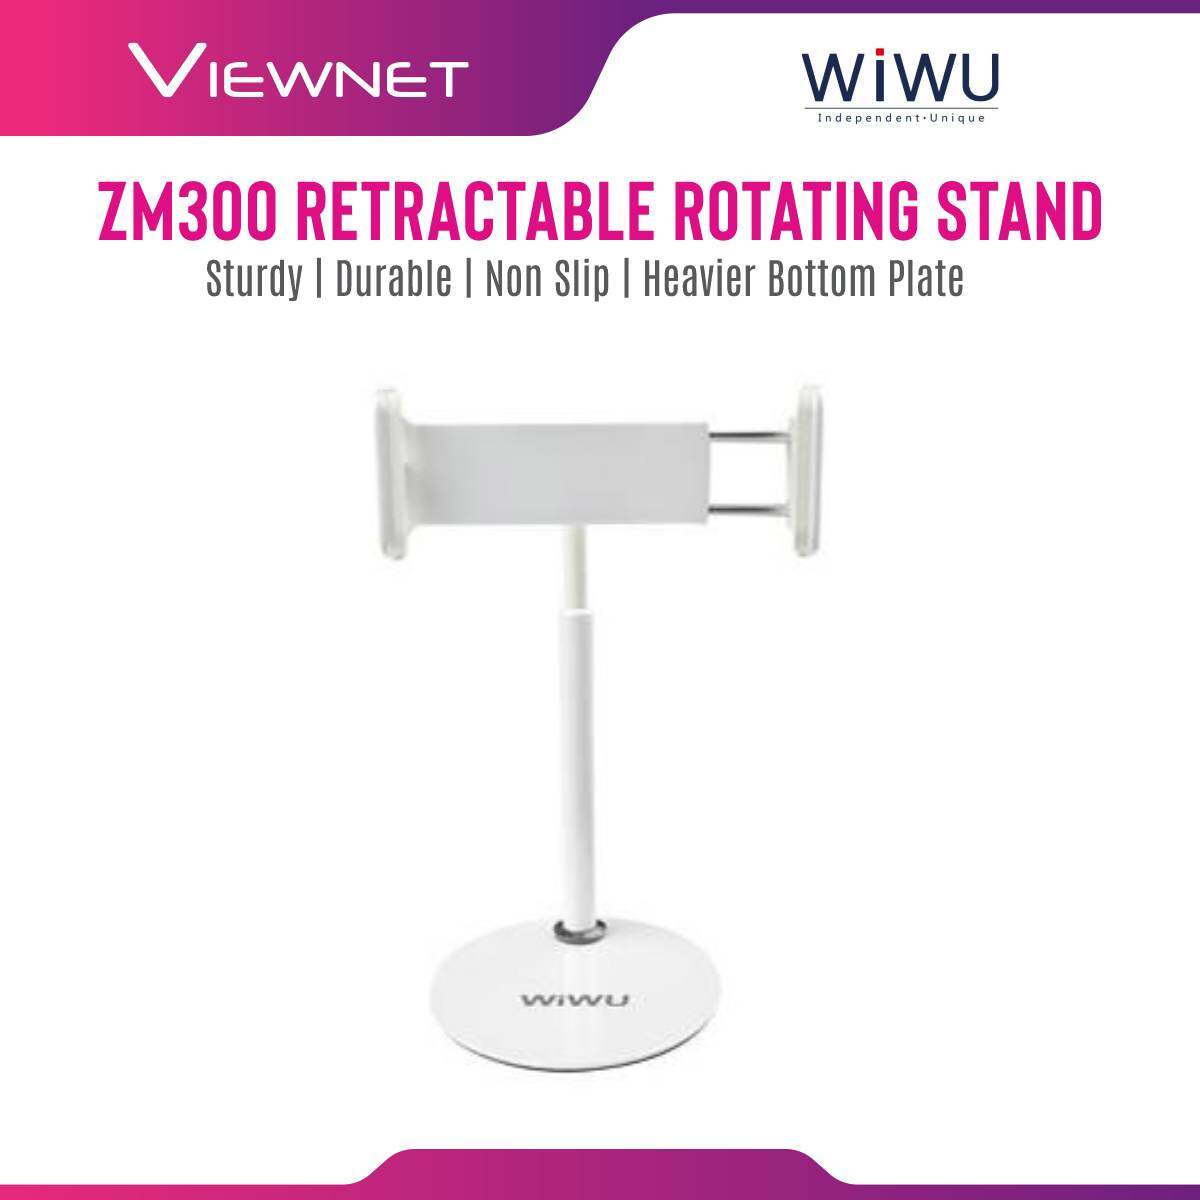 WIWU ZM300 Retractable Rotating Mobile Phone Stand Desktop Stand for Mobile Phones within 4.7-12.9 inches, with Chassis